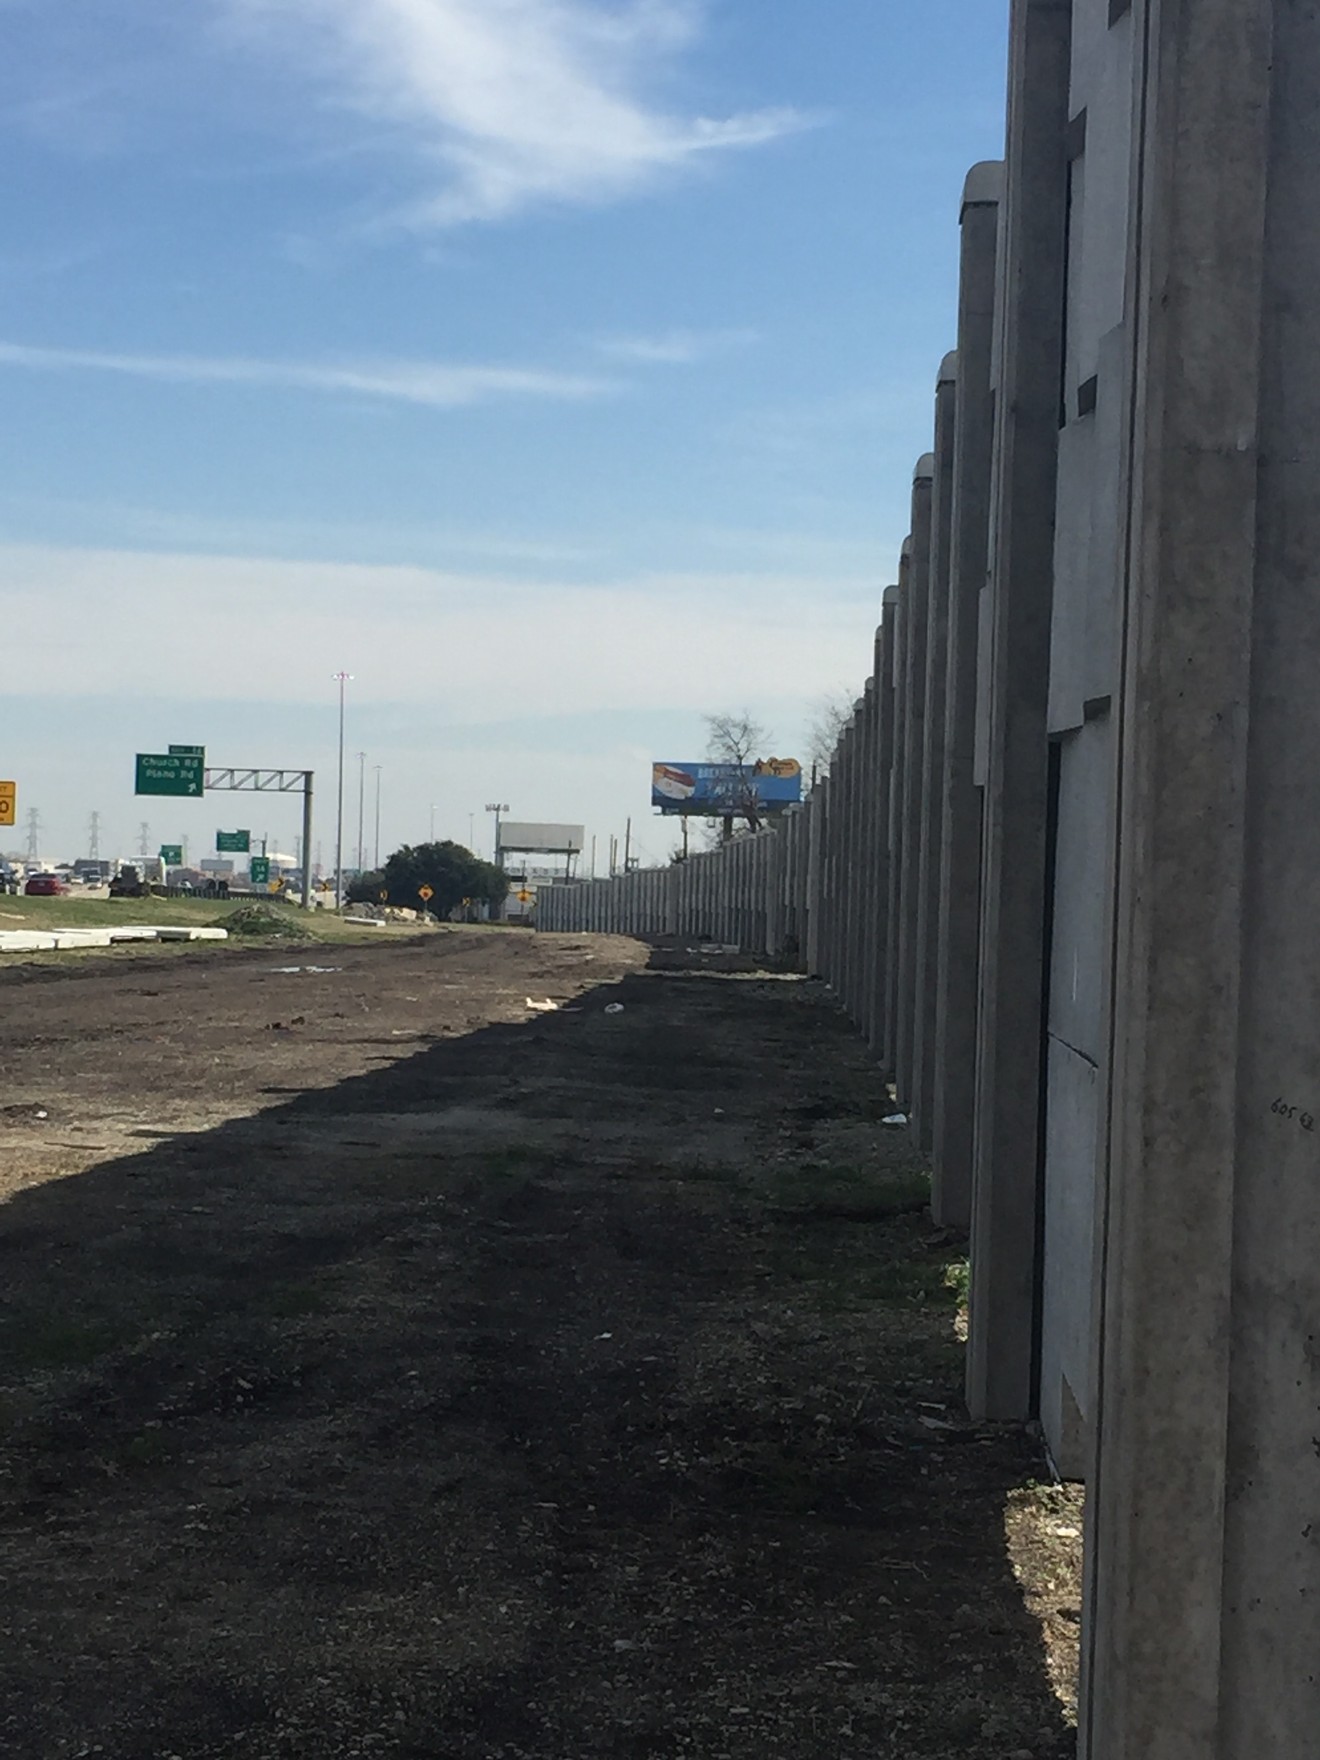 Dallas' great wall is actually pretty good at keeping out noise on LBJ Freeway.